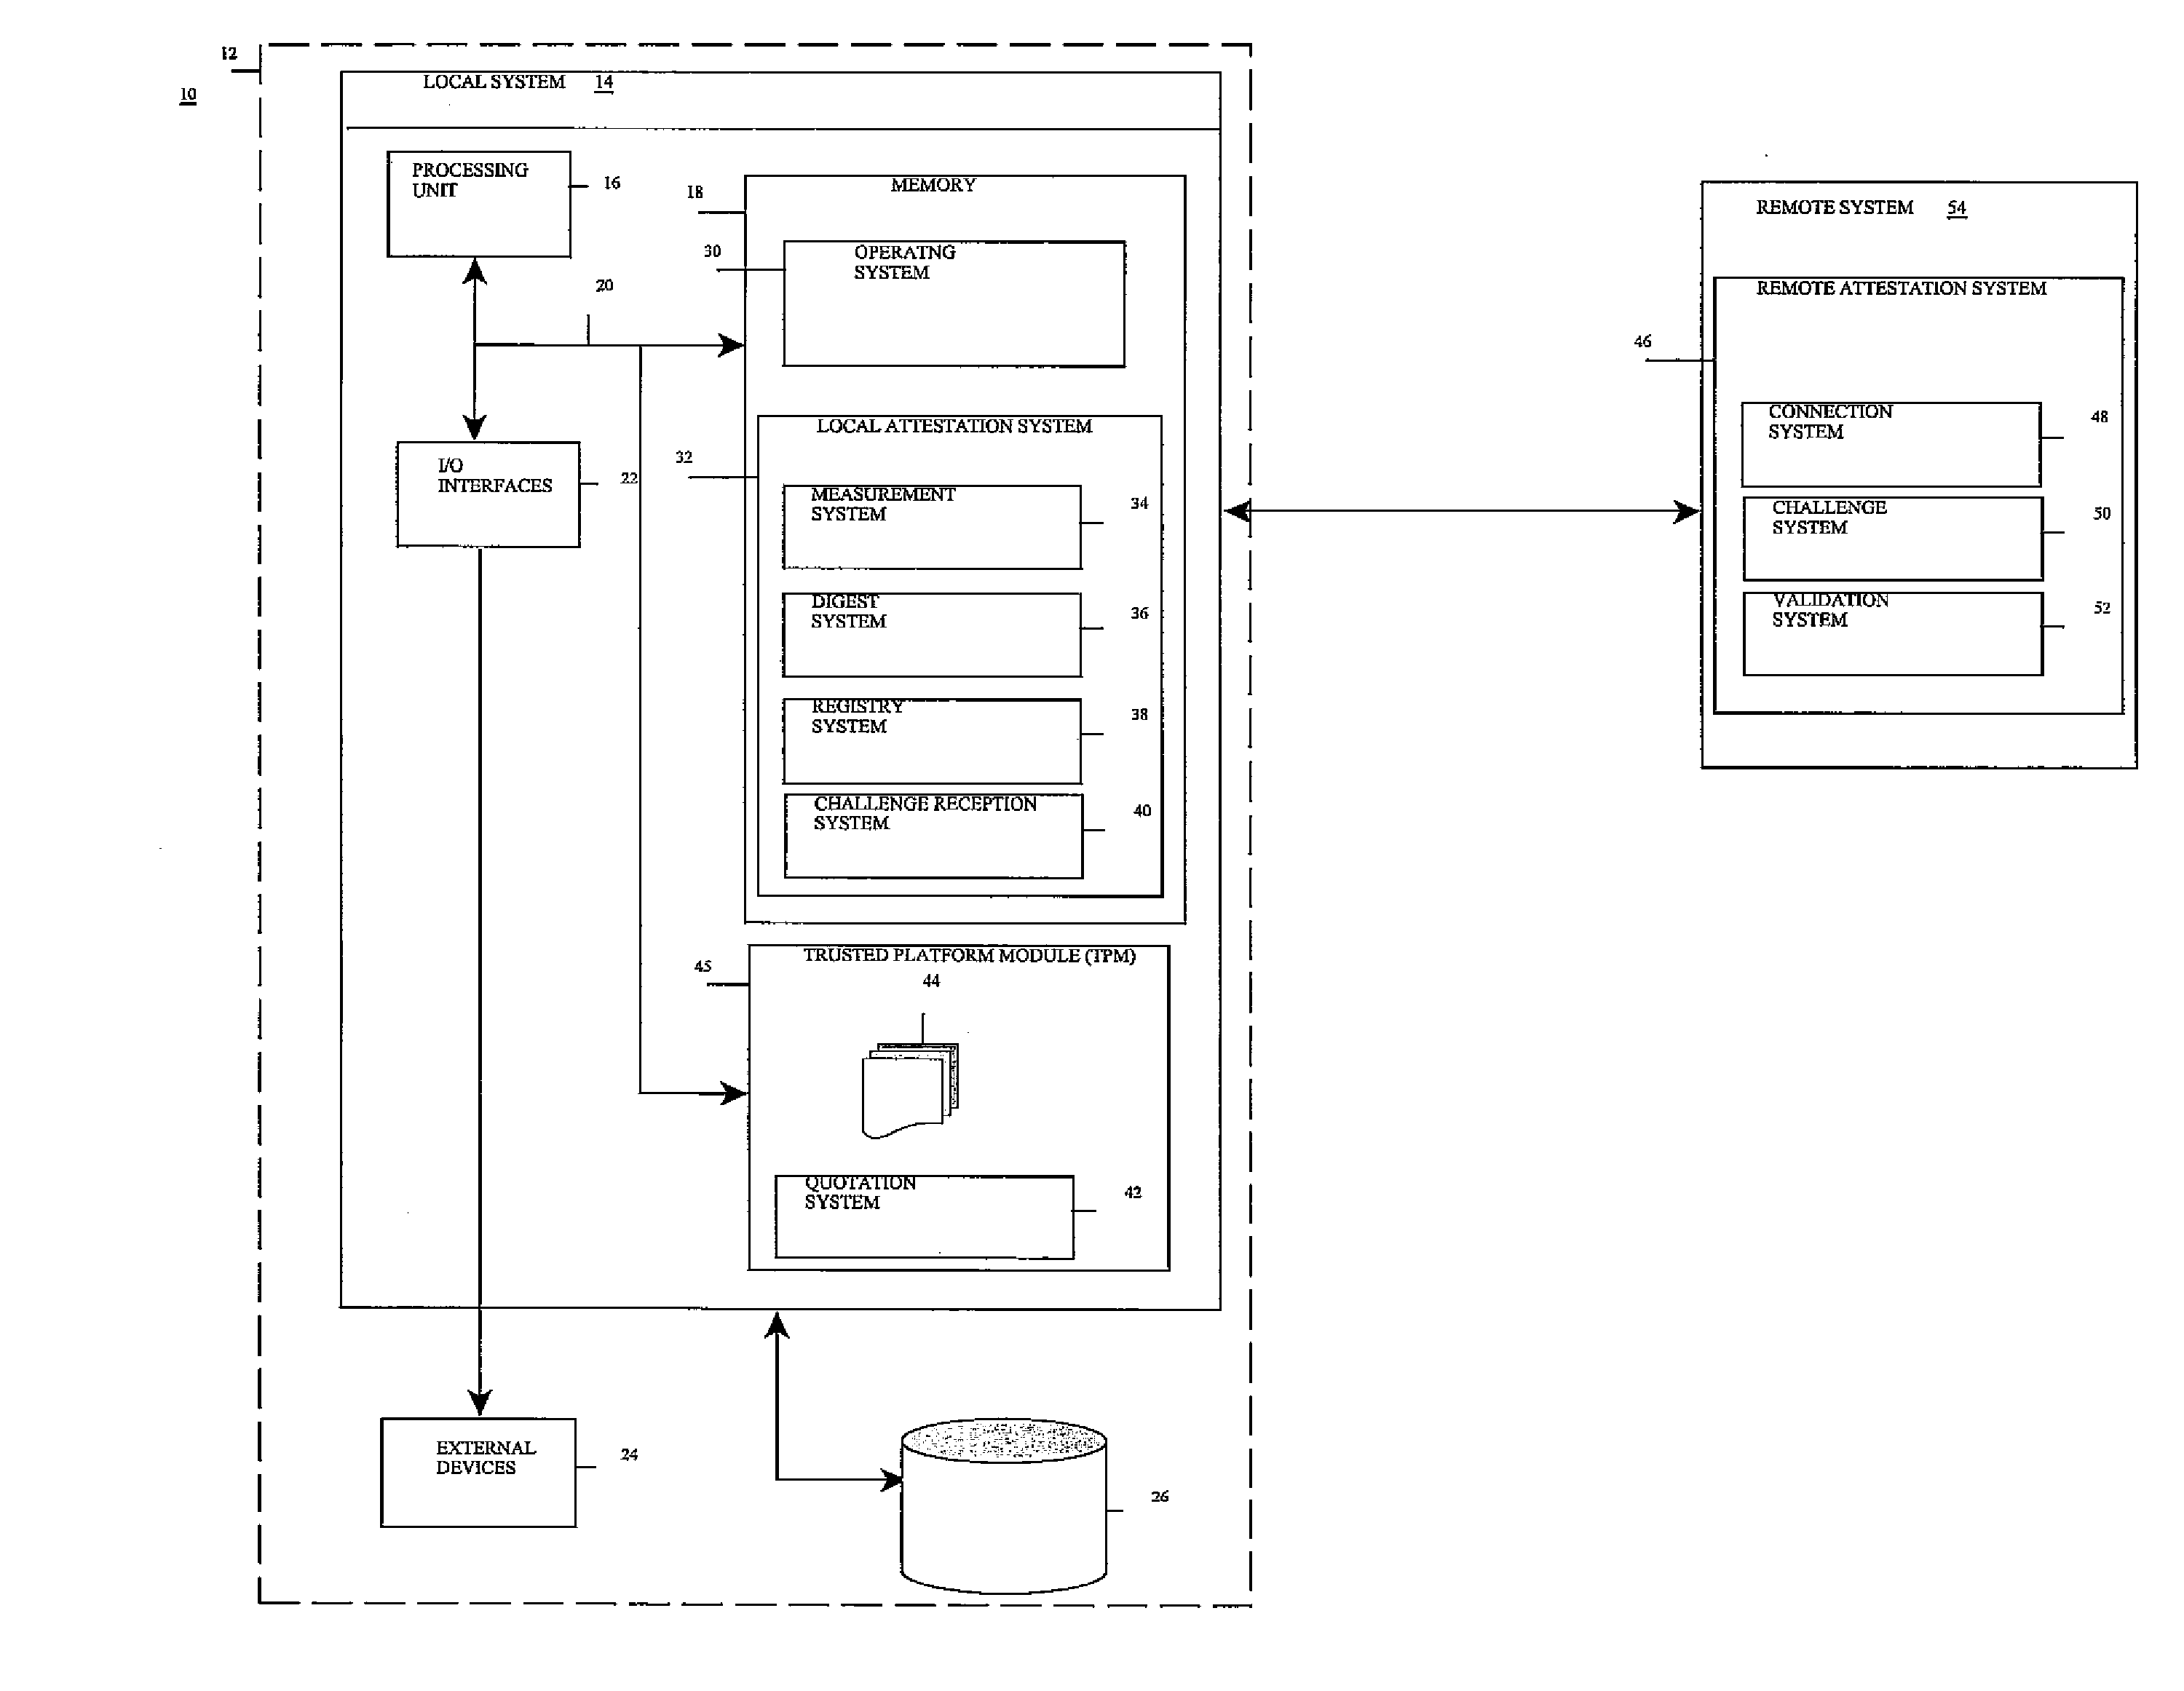 Method, system, and program product for remotely attesting to a state of a computer system